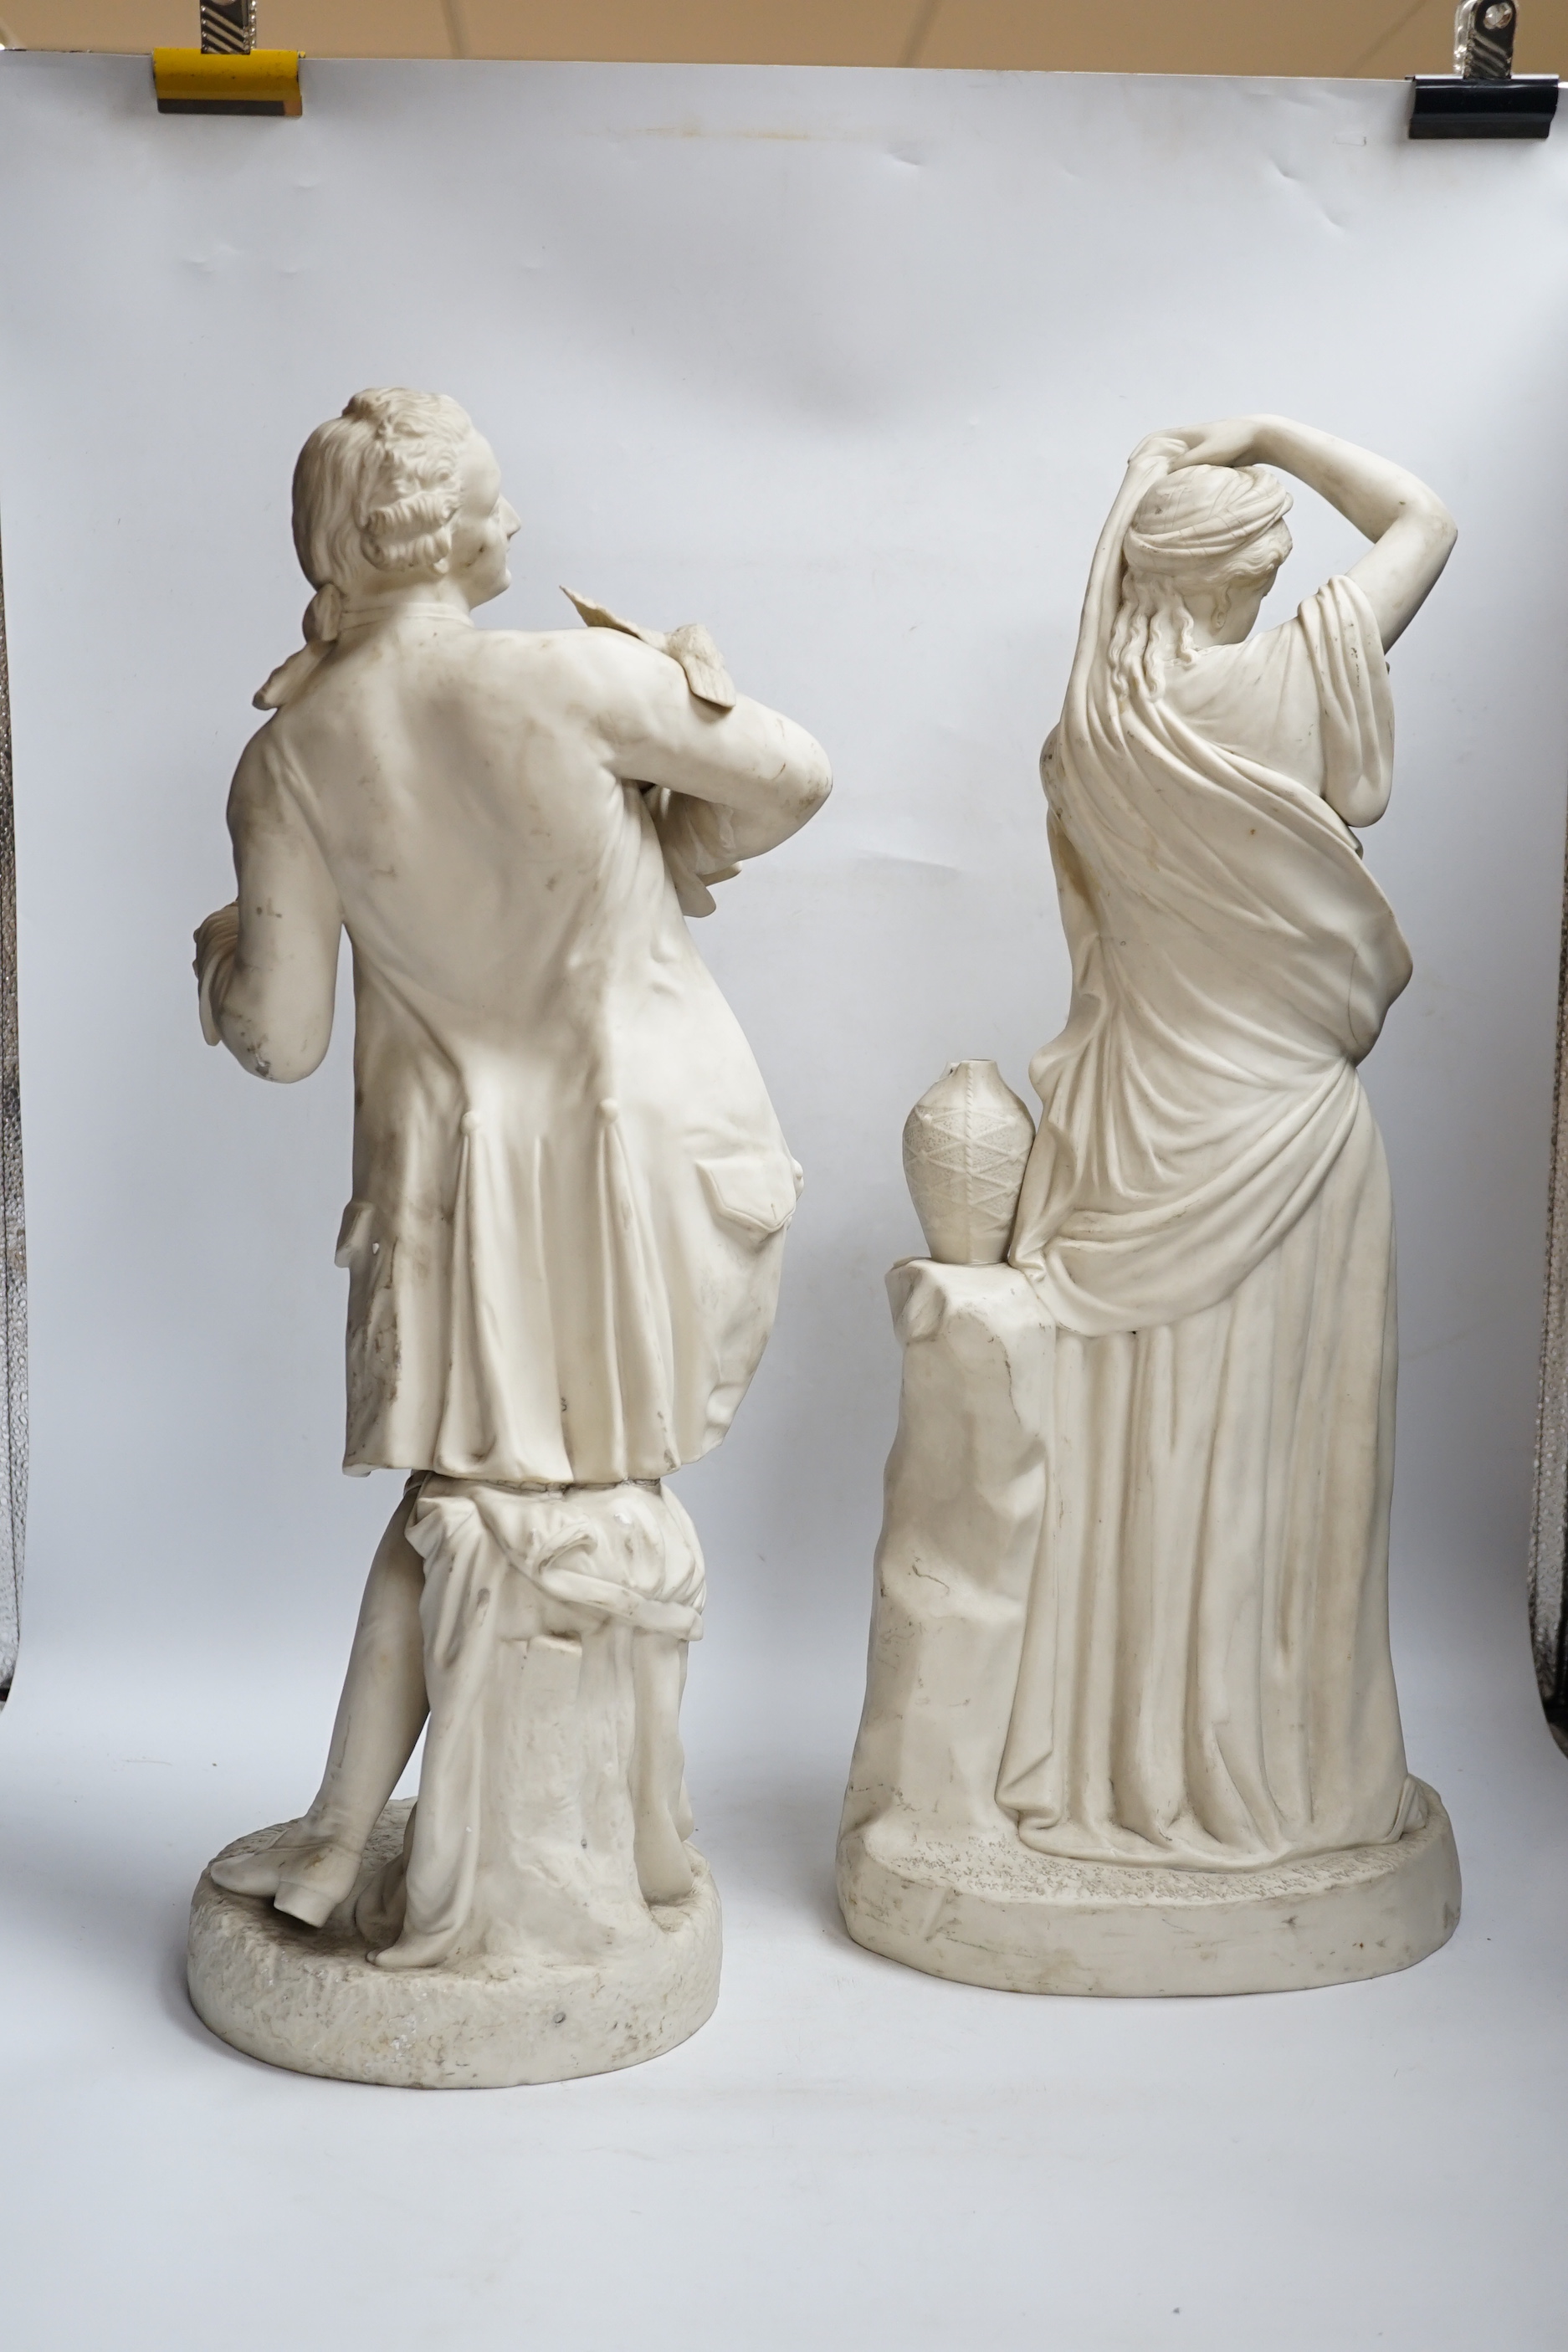 Two large 19th century parian figures, one titled ‘Rebekah’, 55cm